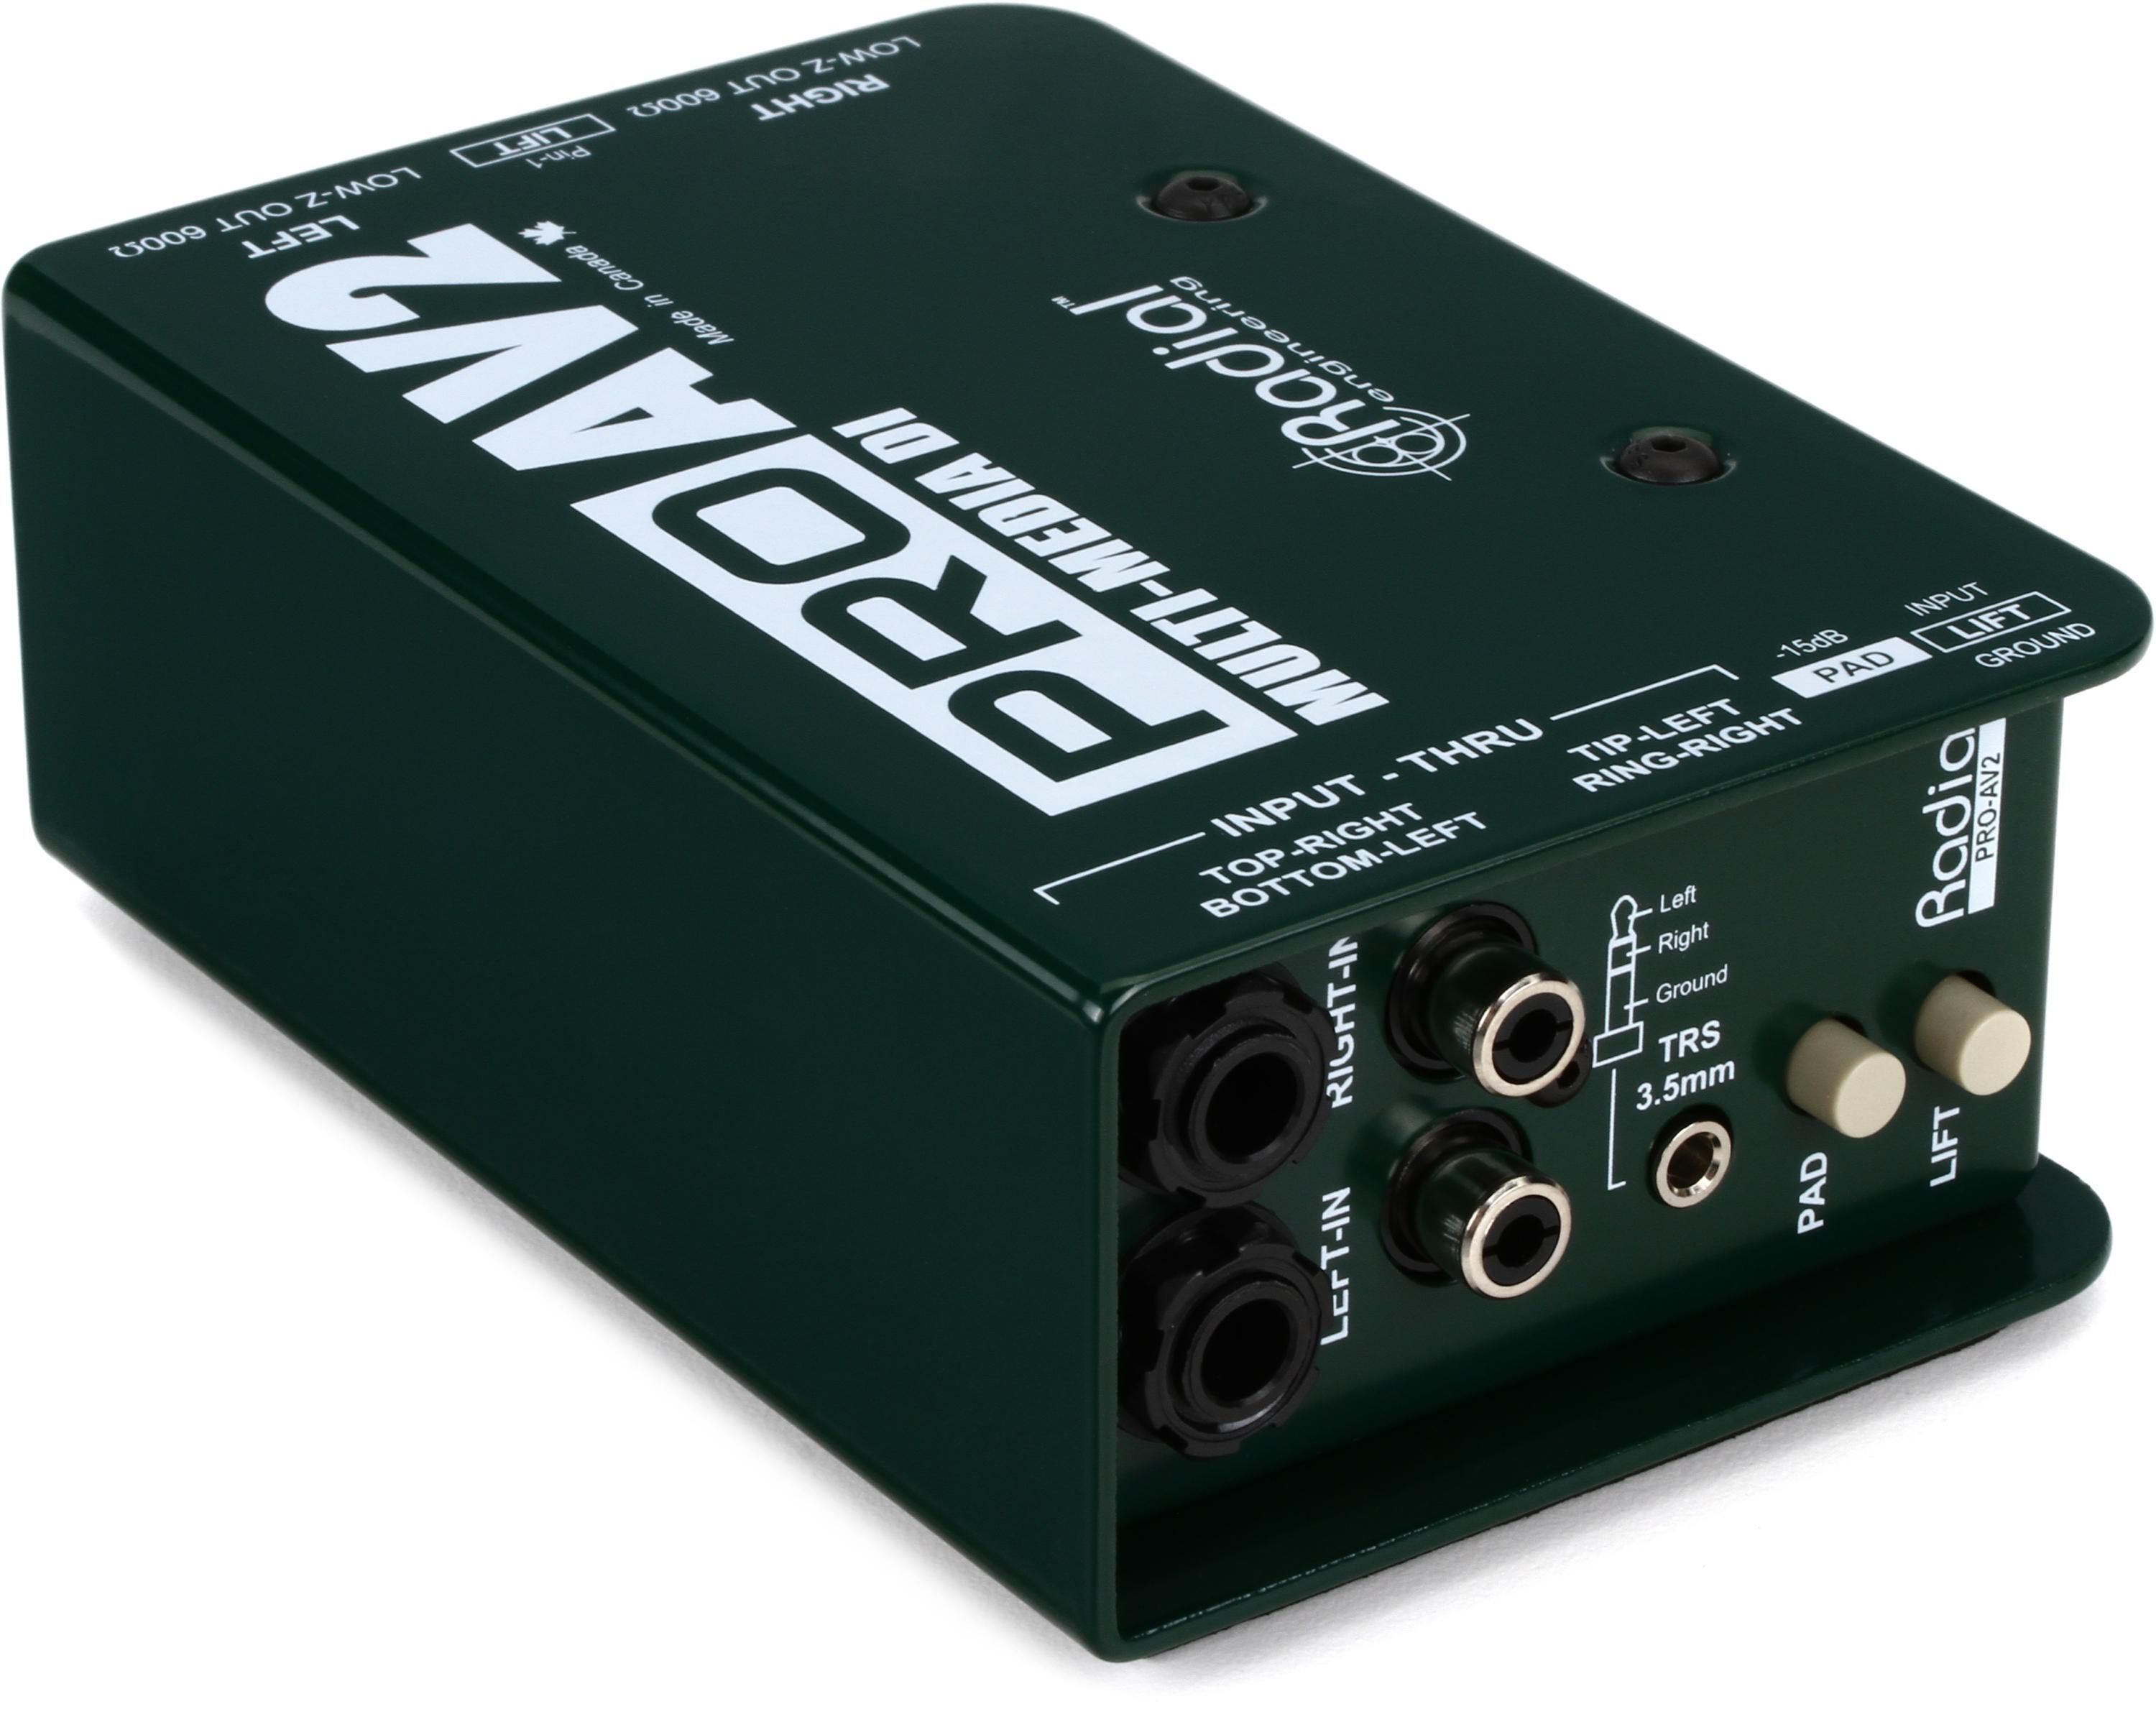 Radial ProAV2 2-channel Passive A/V Direct Box | Sweetwater